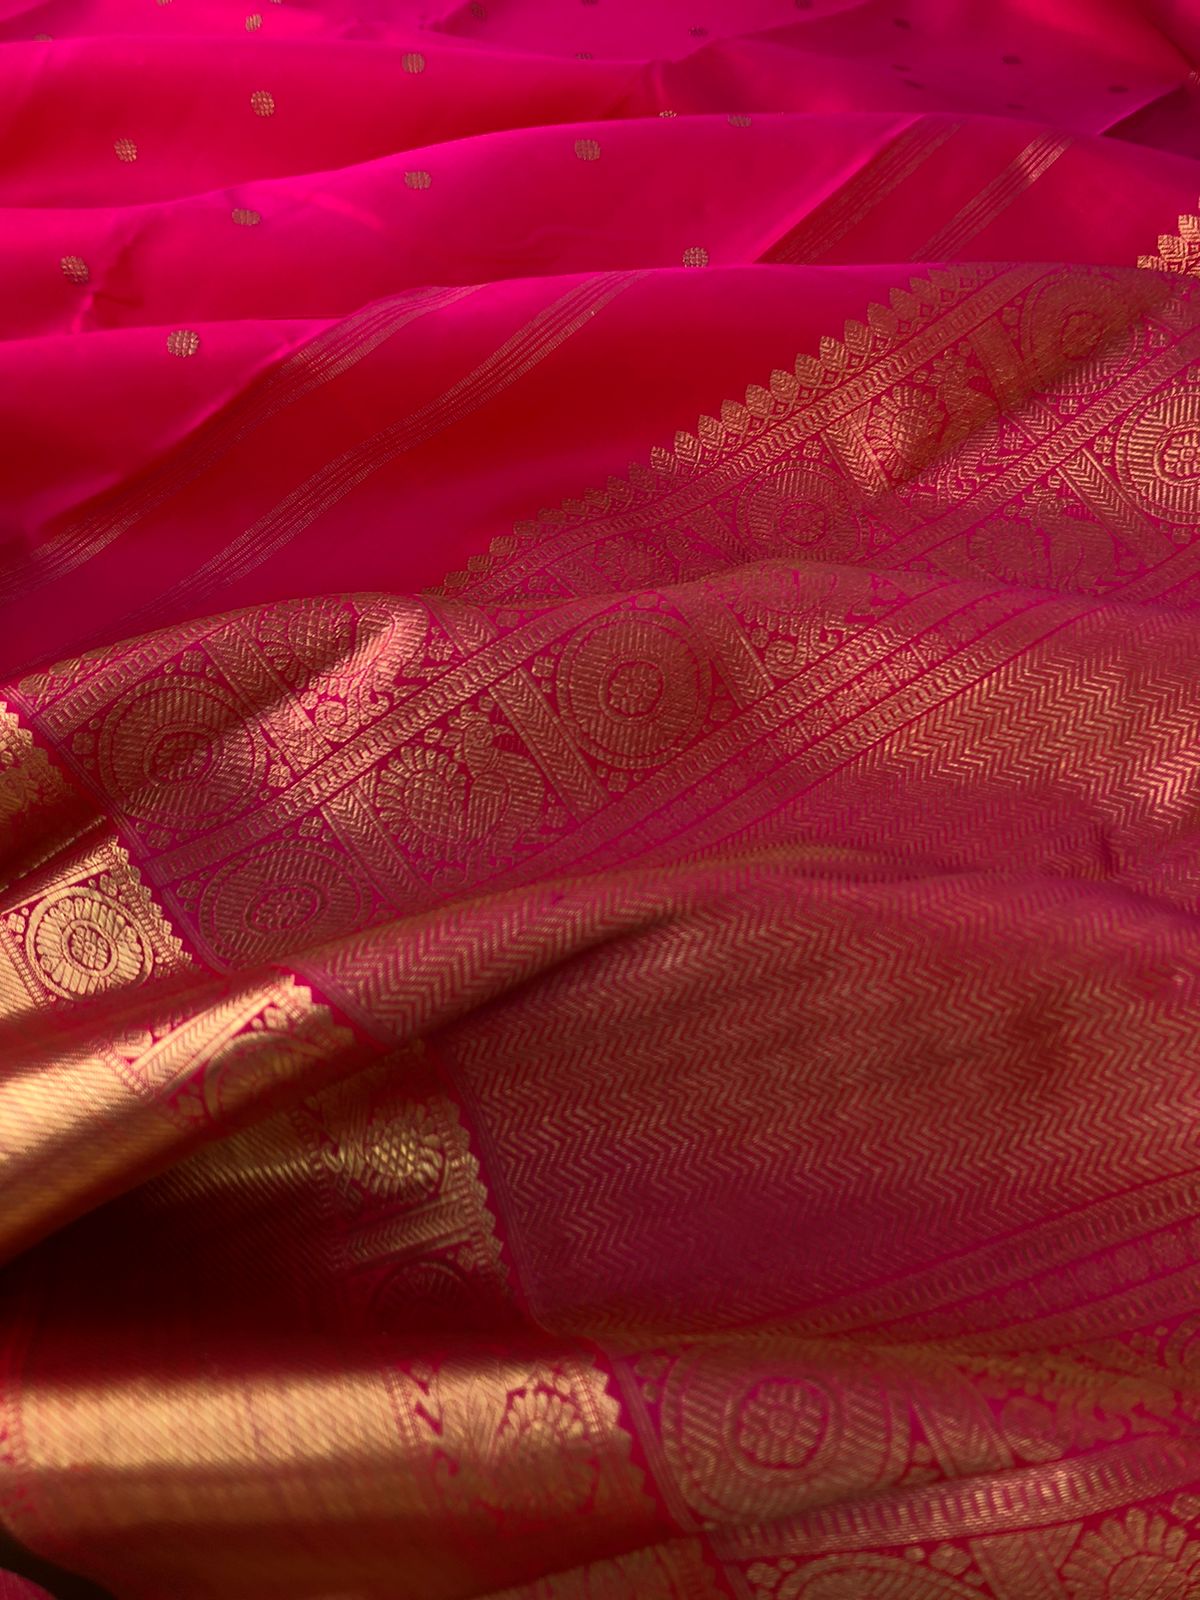 Swarnam - The Solid Kanchivarams - gorgeous rani pink and gold